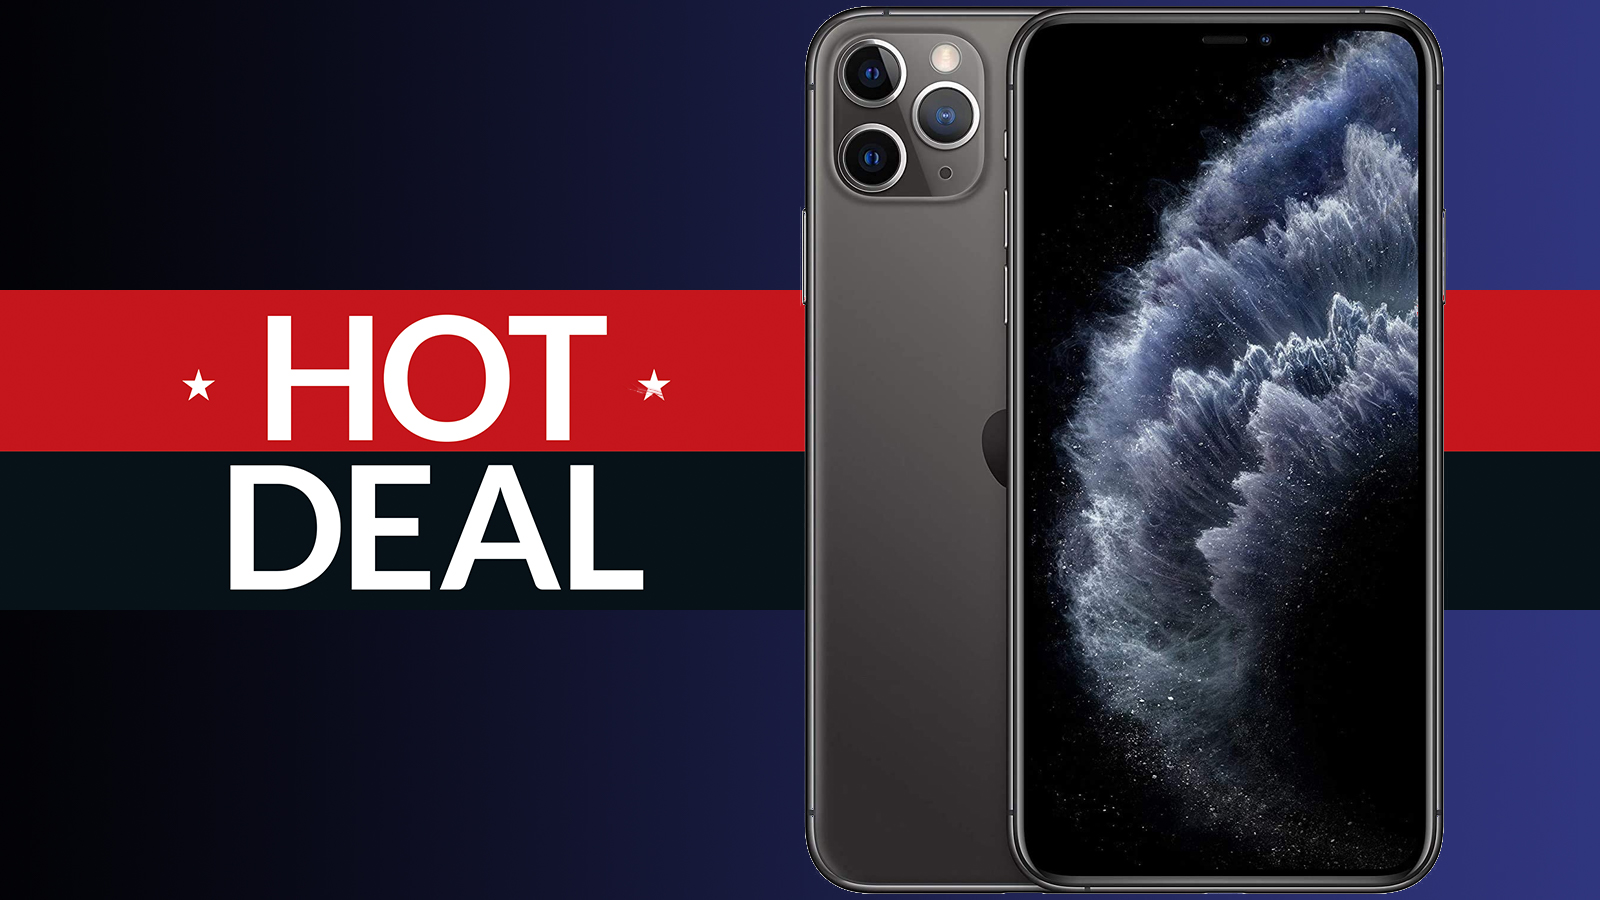 Deals On Iphone 11 Pro Max Smartphones Save Up To 1 000 With Eligible Trade Ins T3 - how to trade in roblox ipad